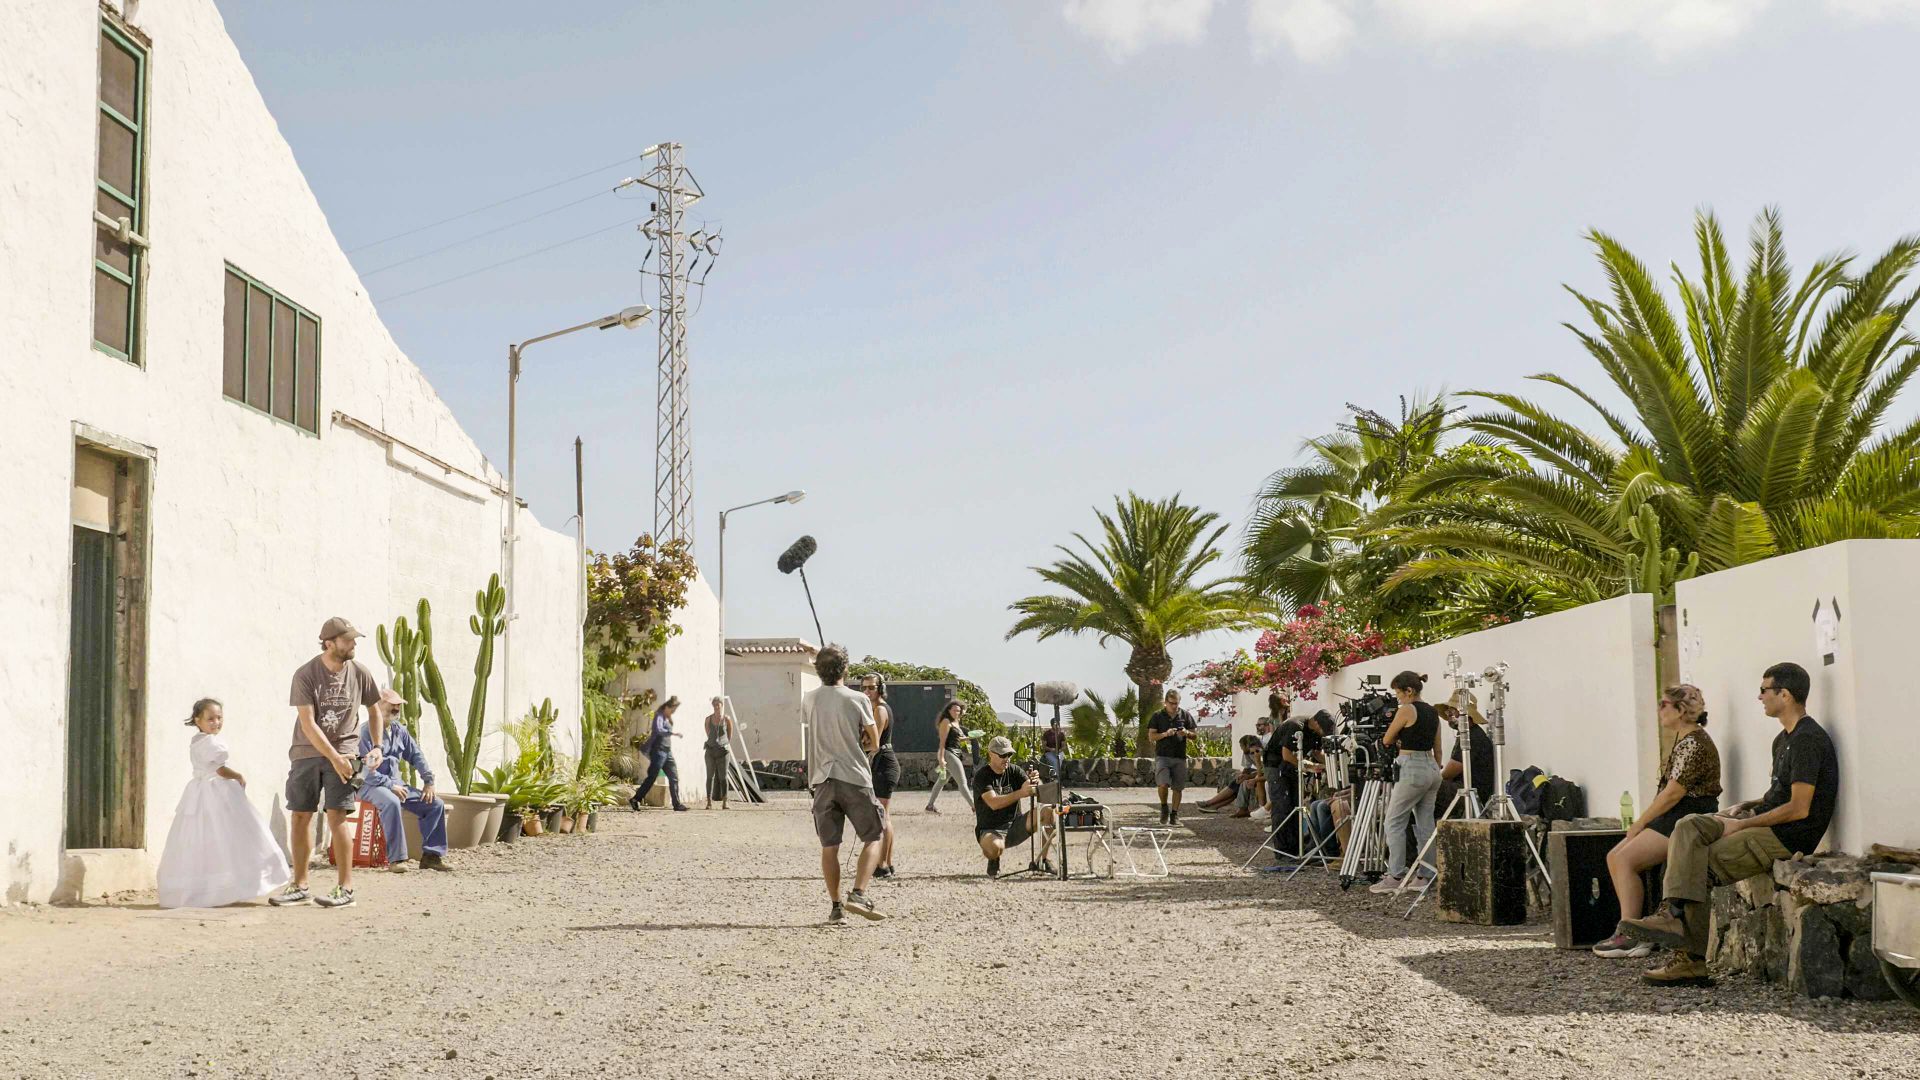 Tax incentives go up to 50 % for film productions in Tenerife and the Canaries